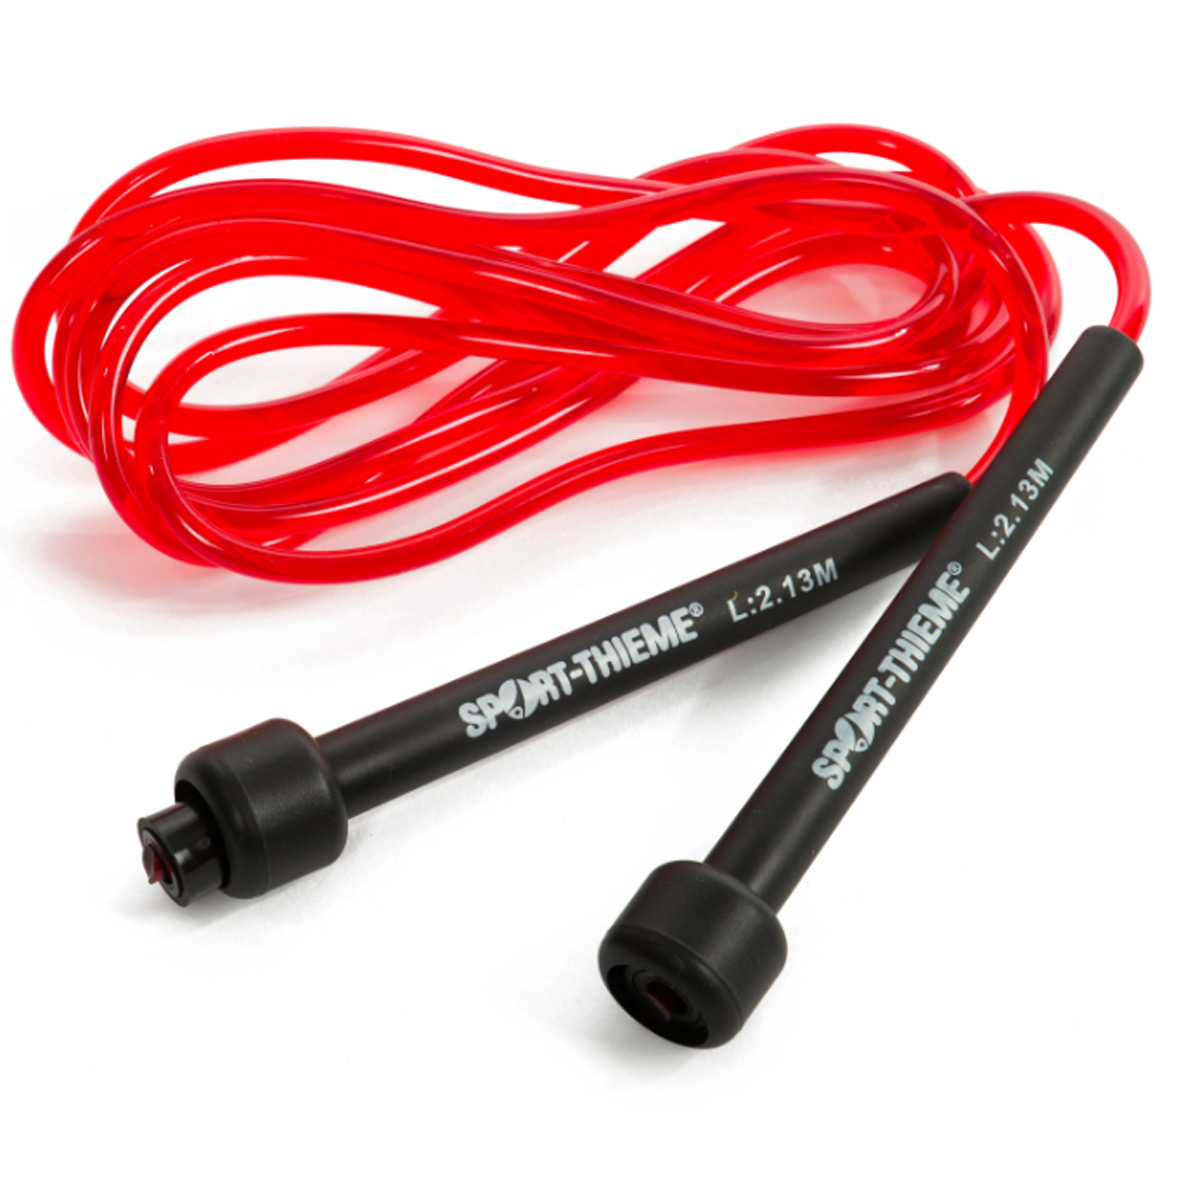 Skipping rope "Speed-Rope" red